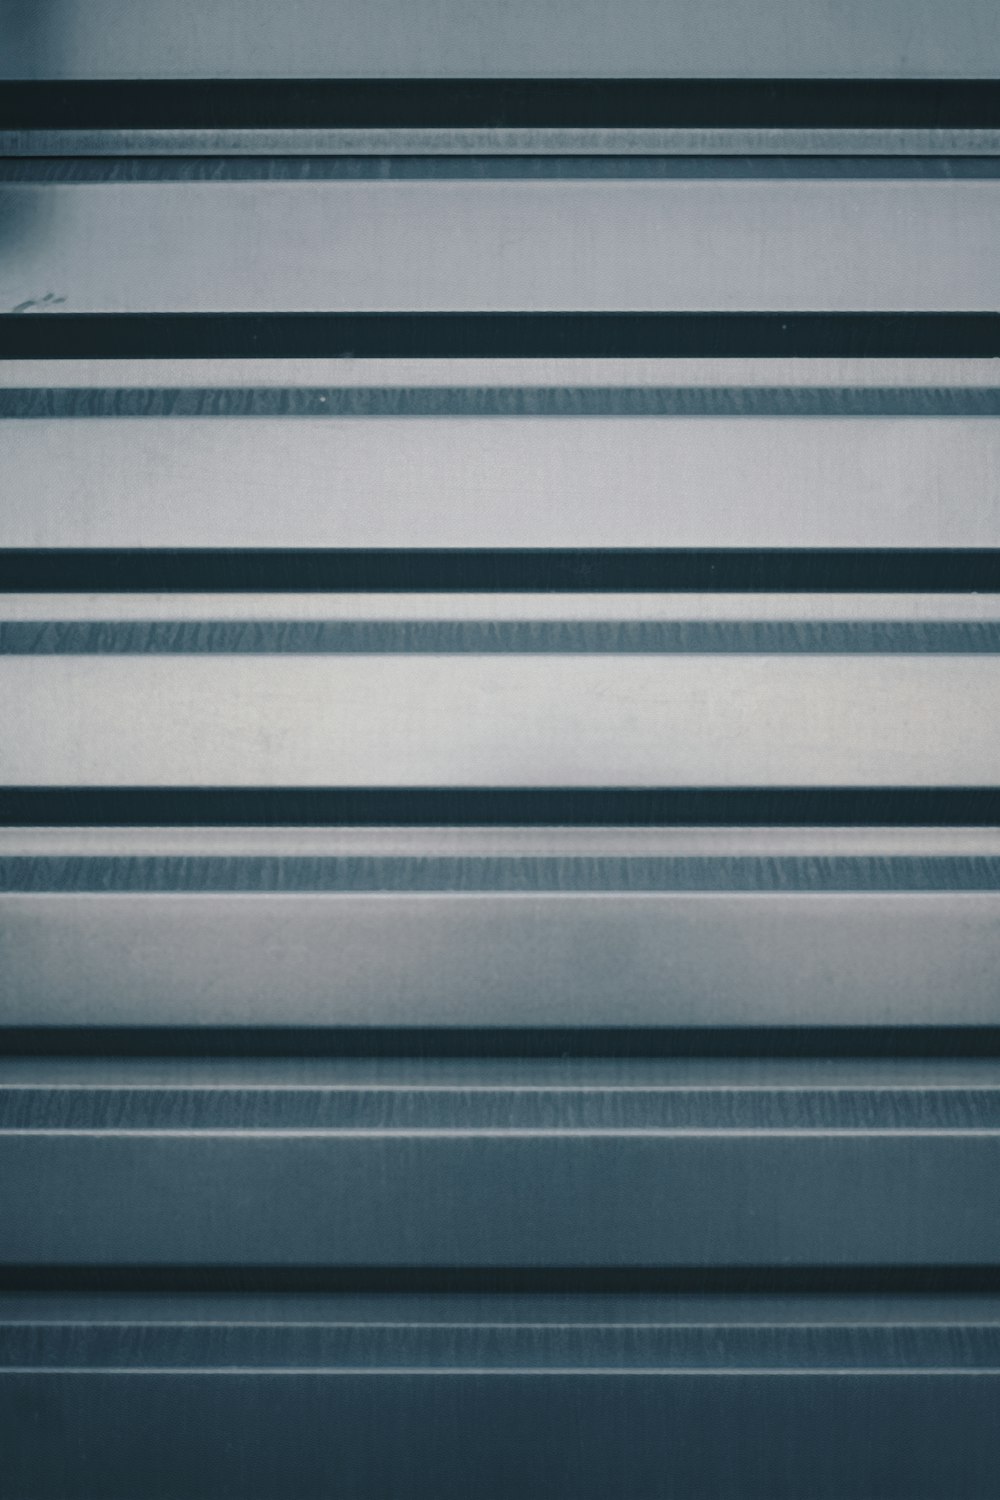 a close up of a metal surface with horizontal lines